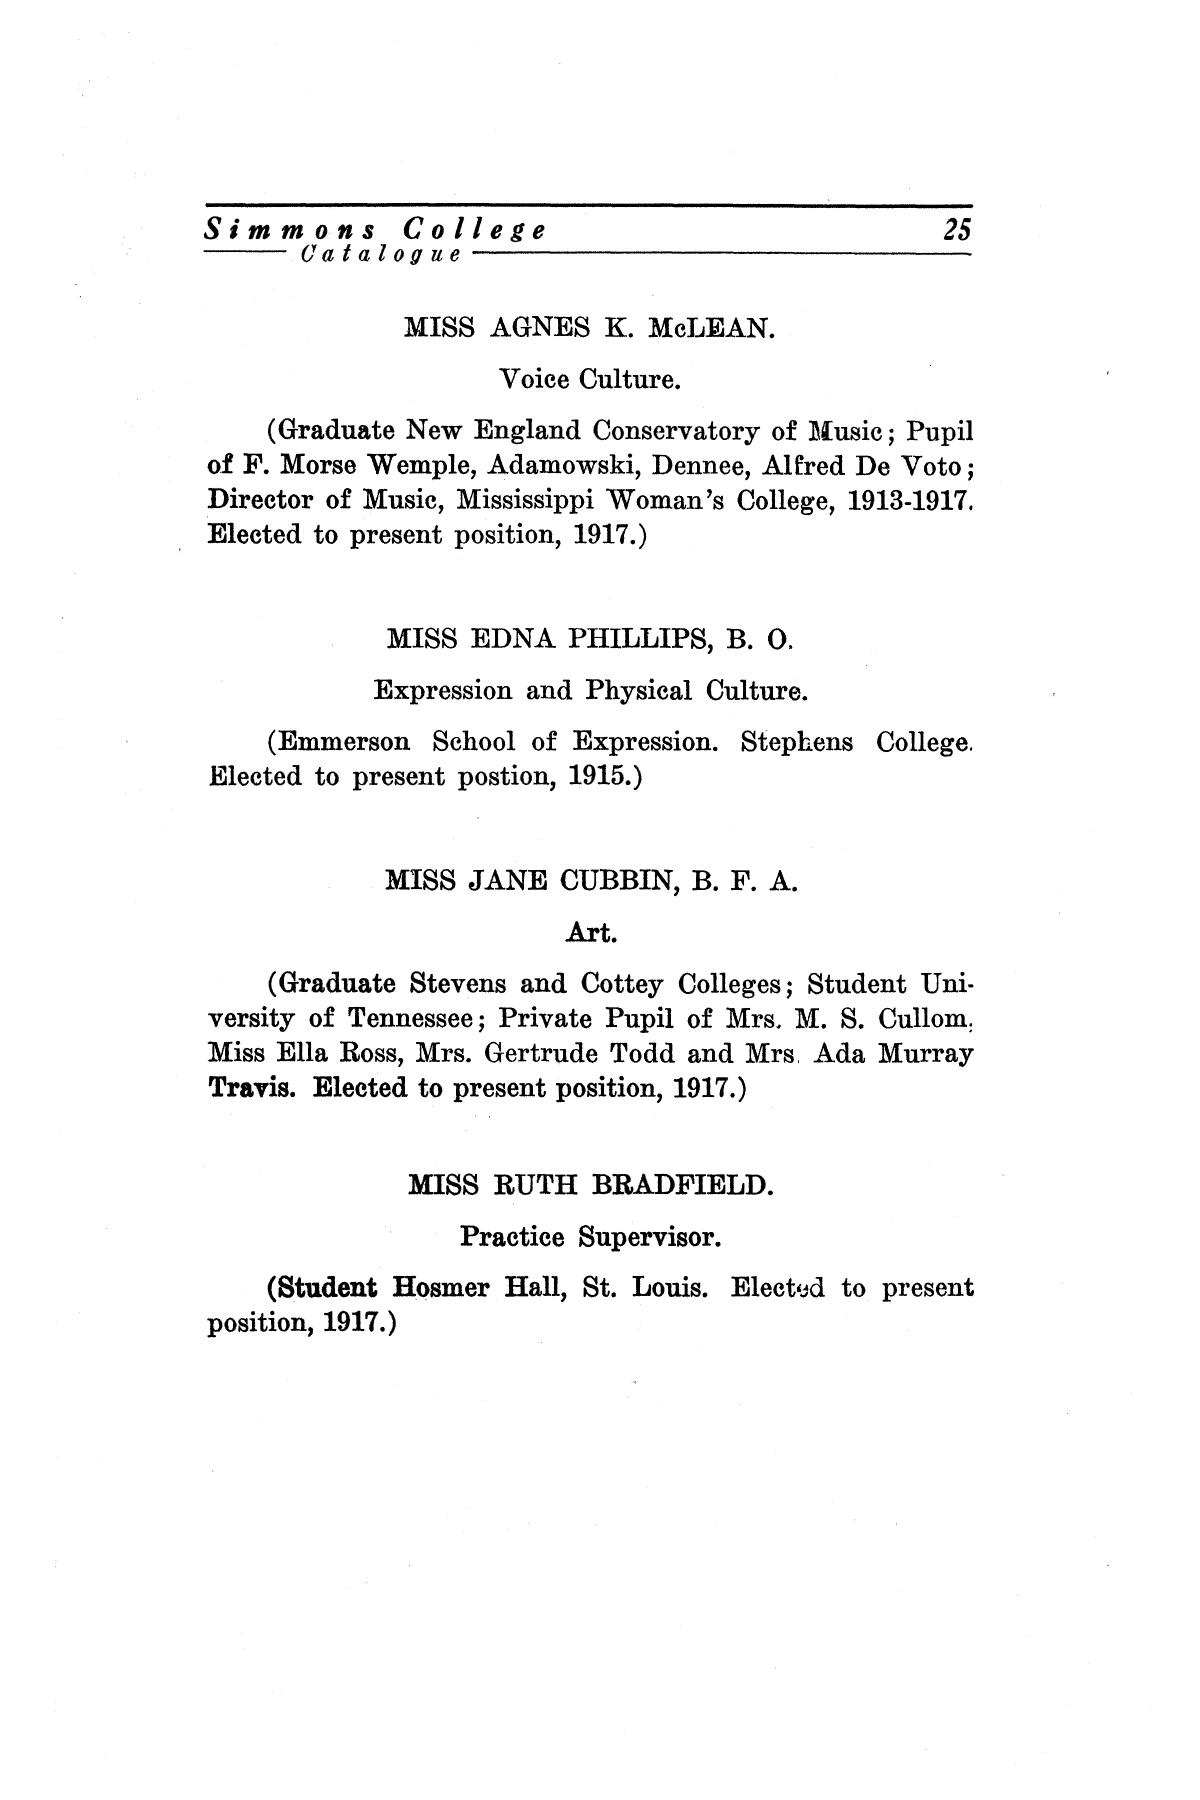 Catalogue of Simmons College, 1917-1918
                                                
                                                    25
                                                